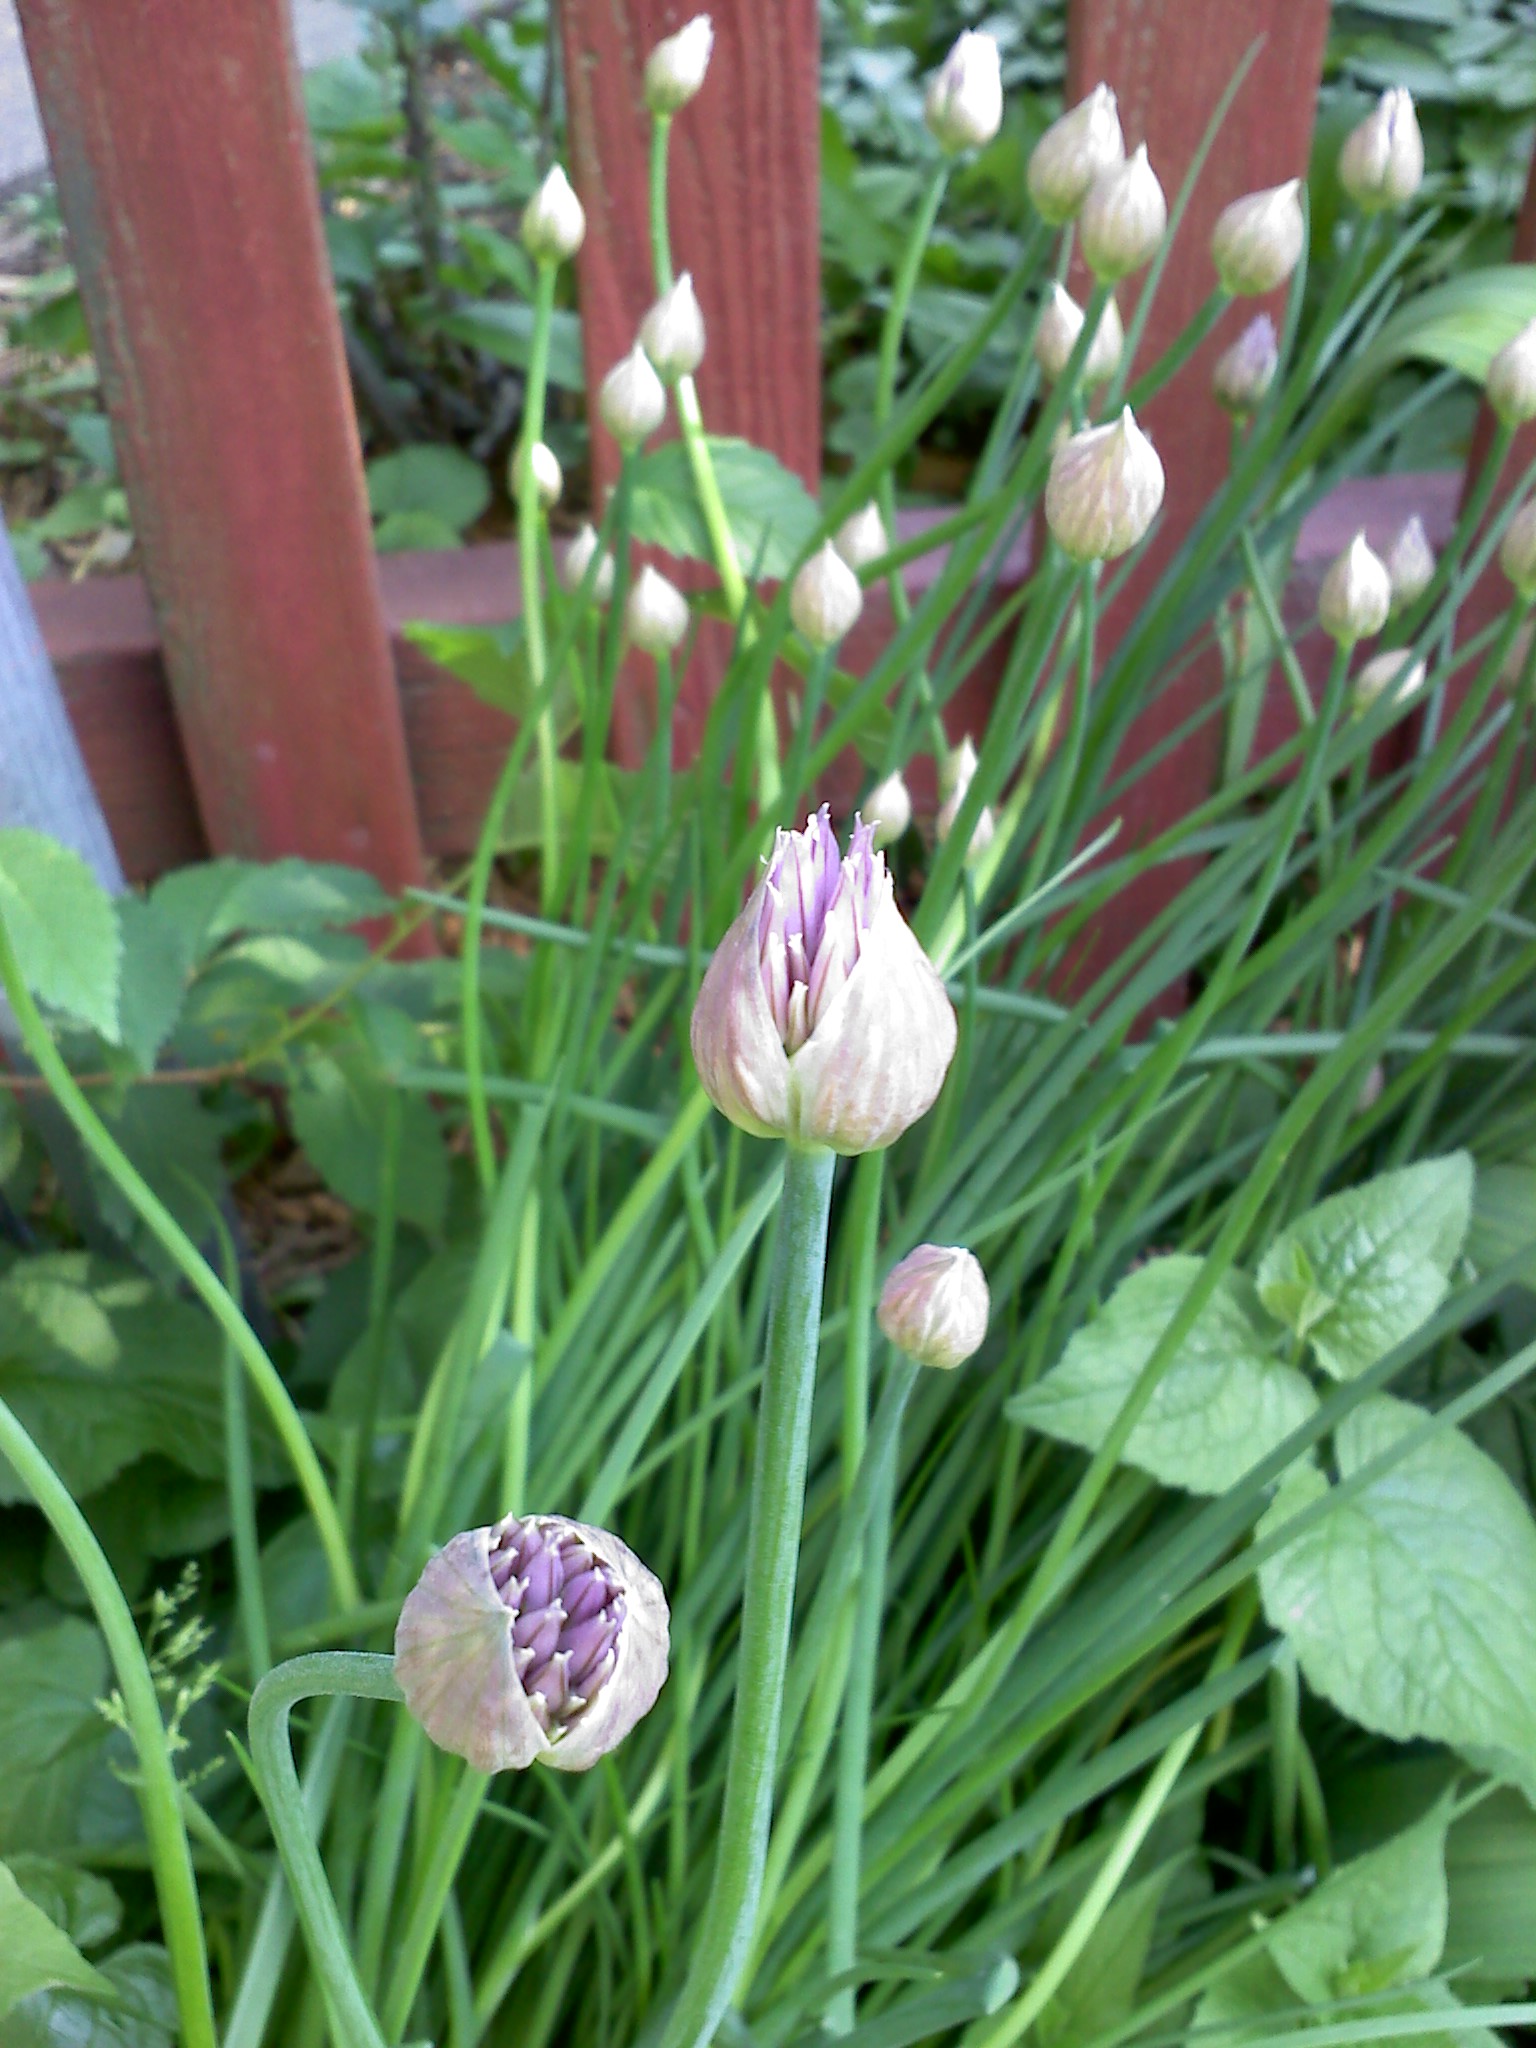 Chives: Chives